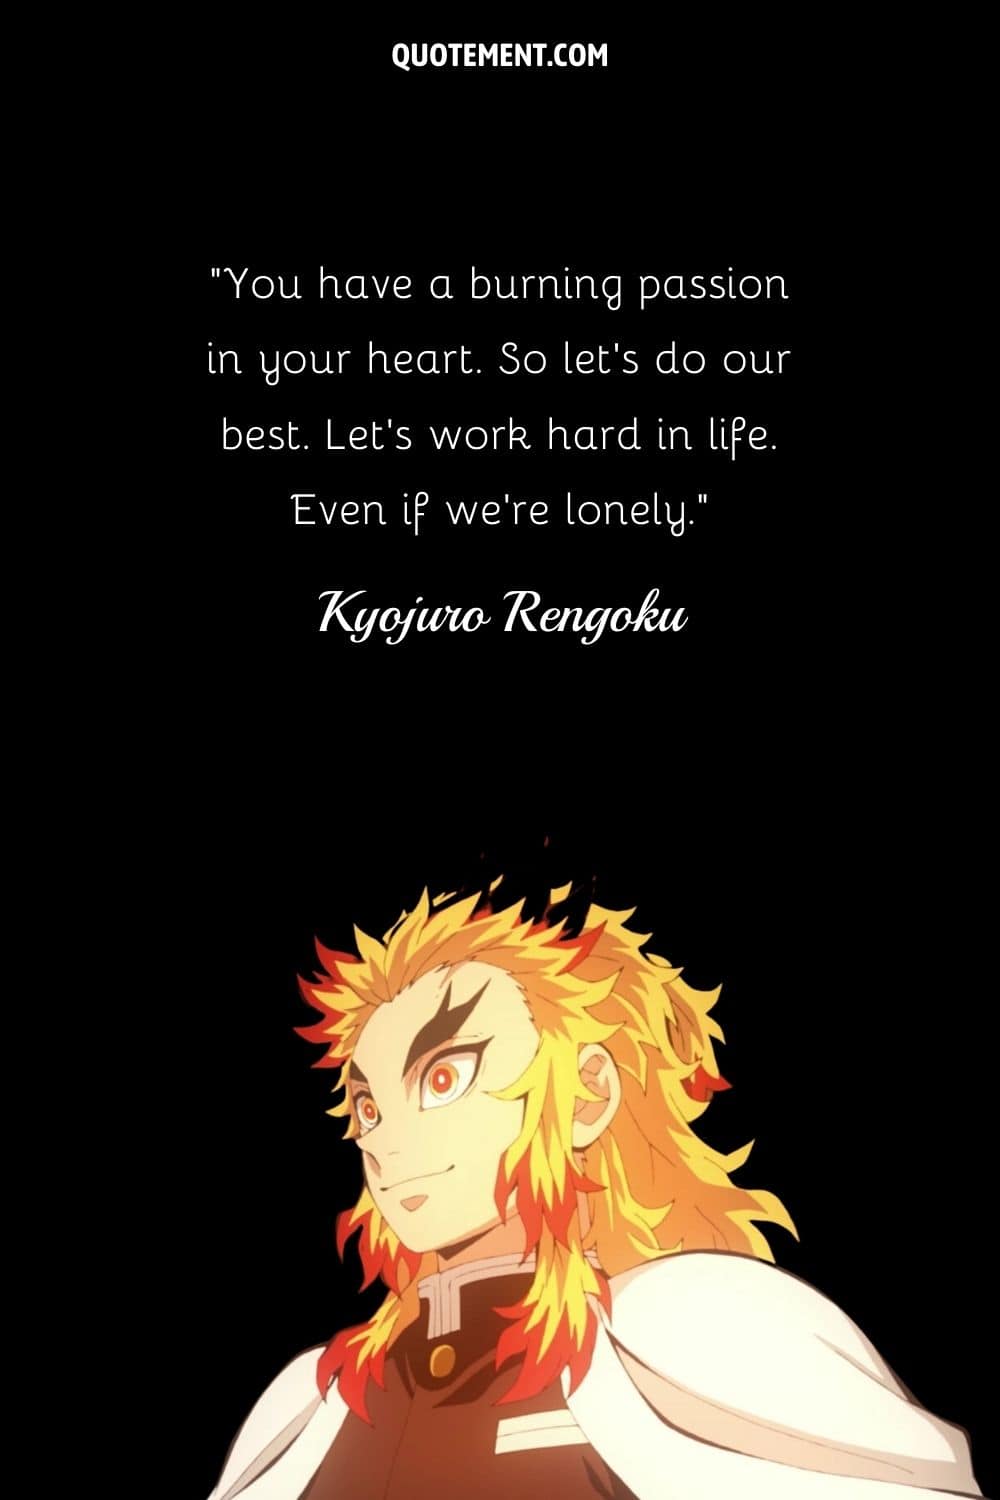 You have a burning passion in your heart. So let’s do our best. Let’s work hard in life.